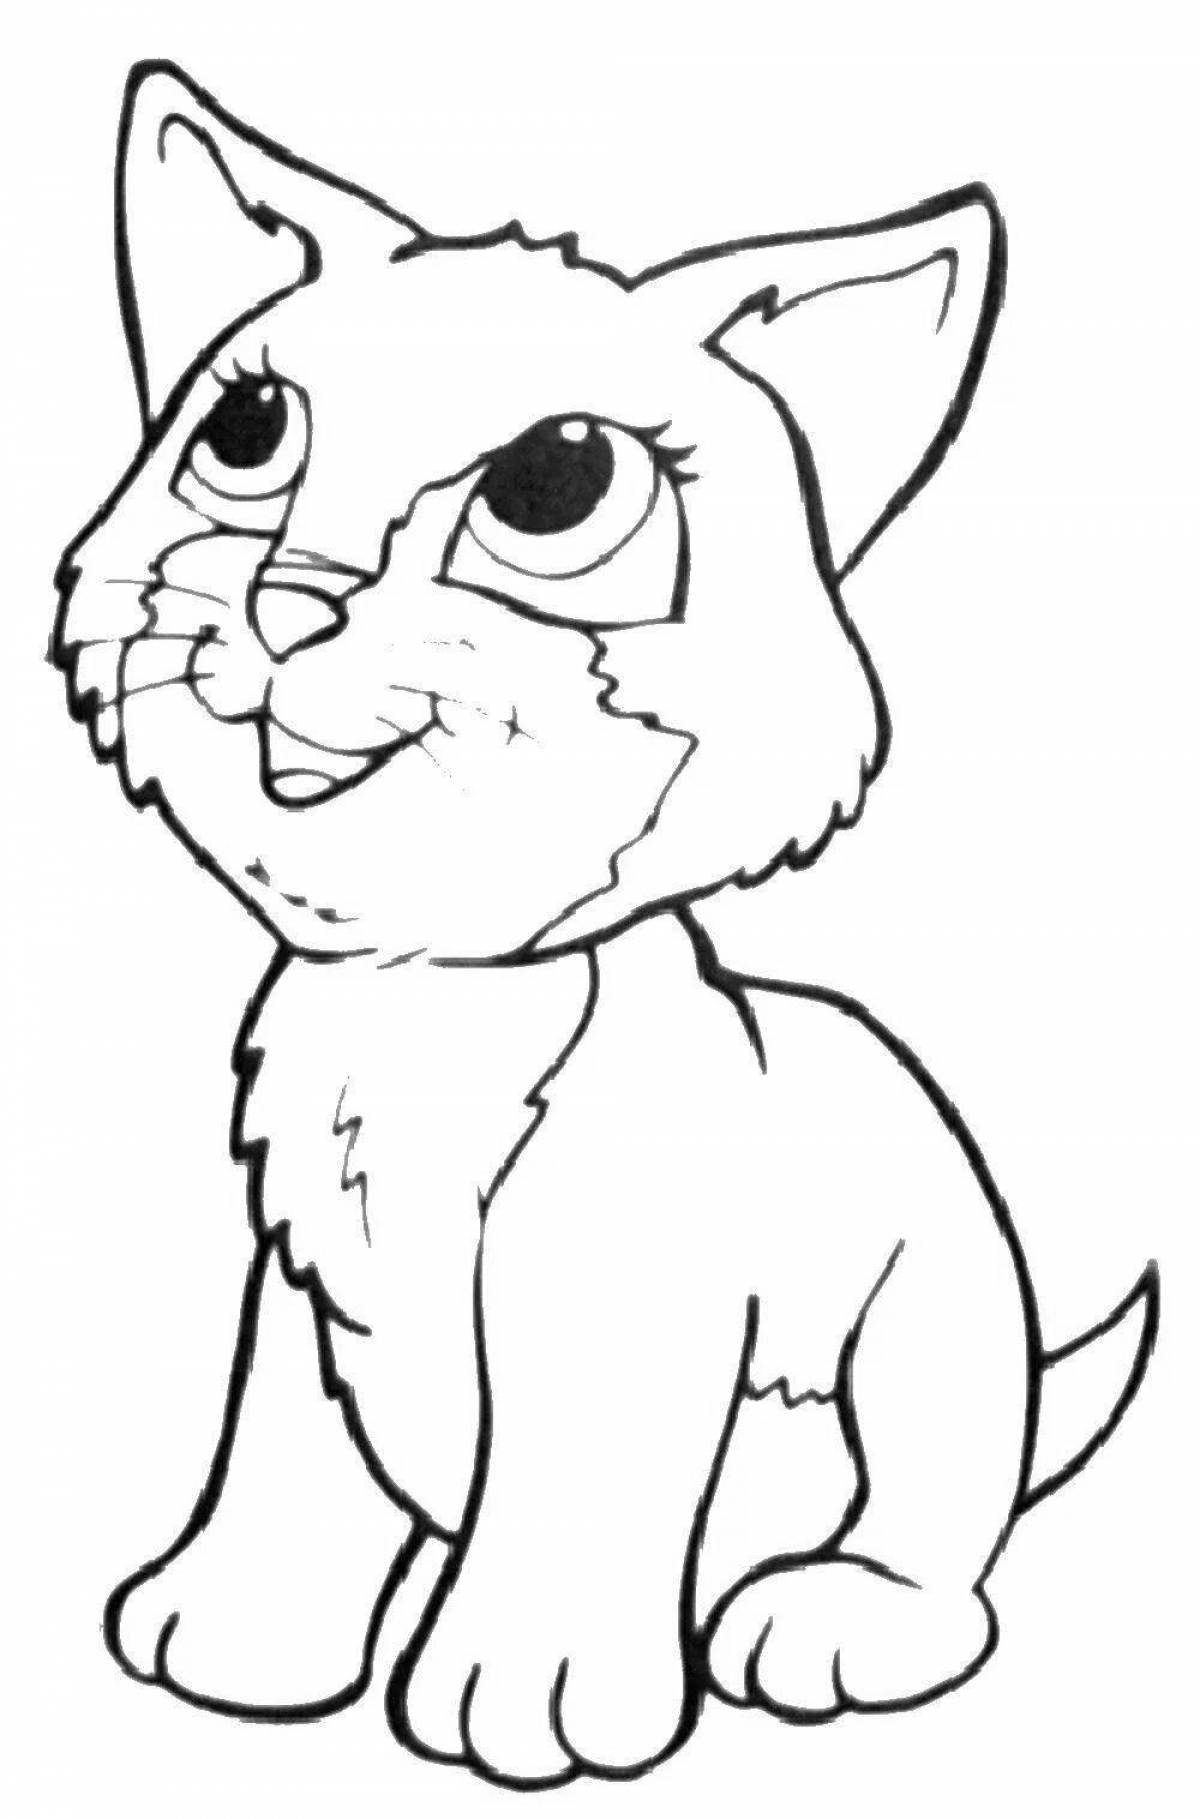 Friendly cat and dog coloring pages for kids